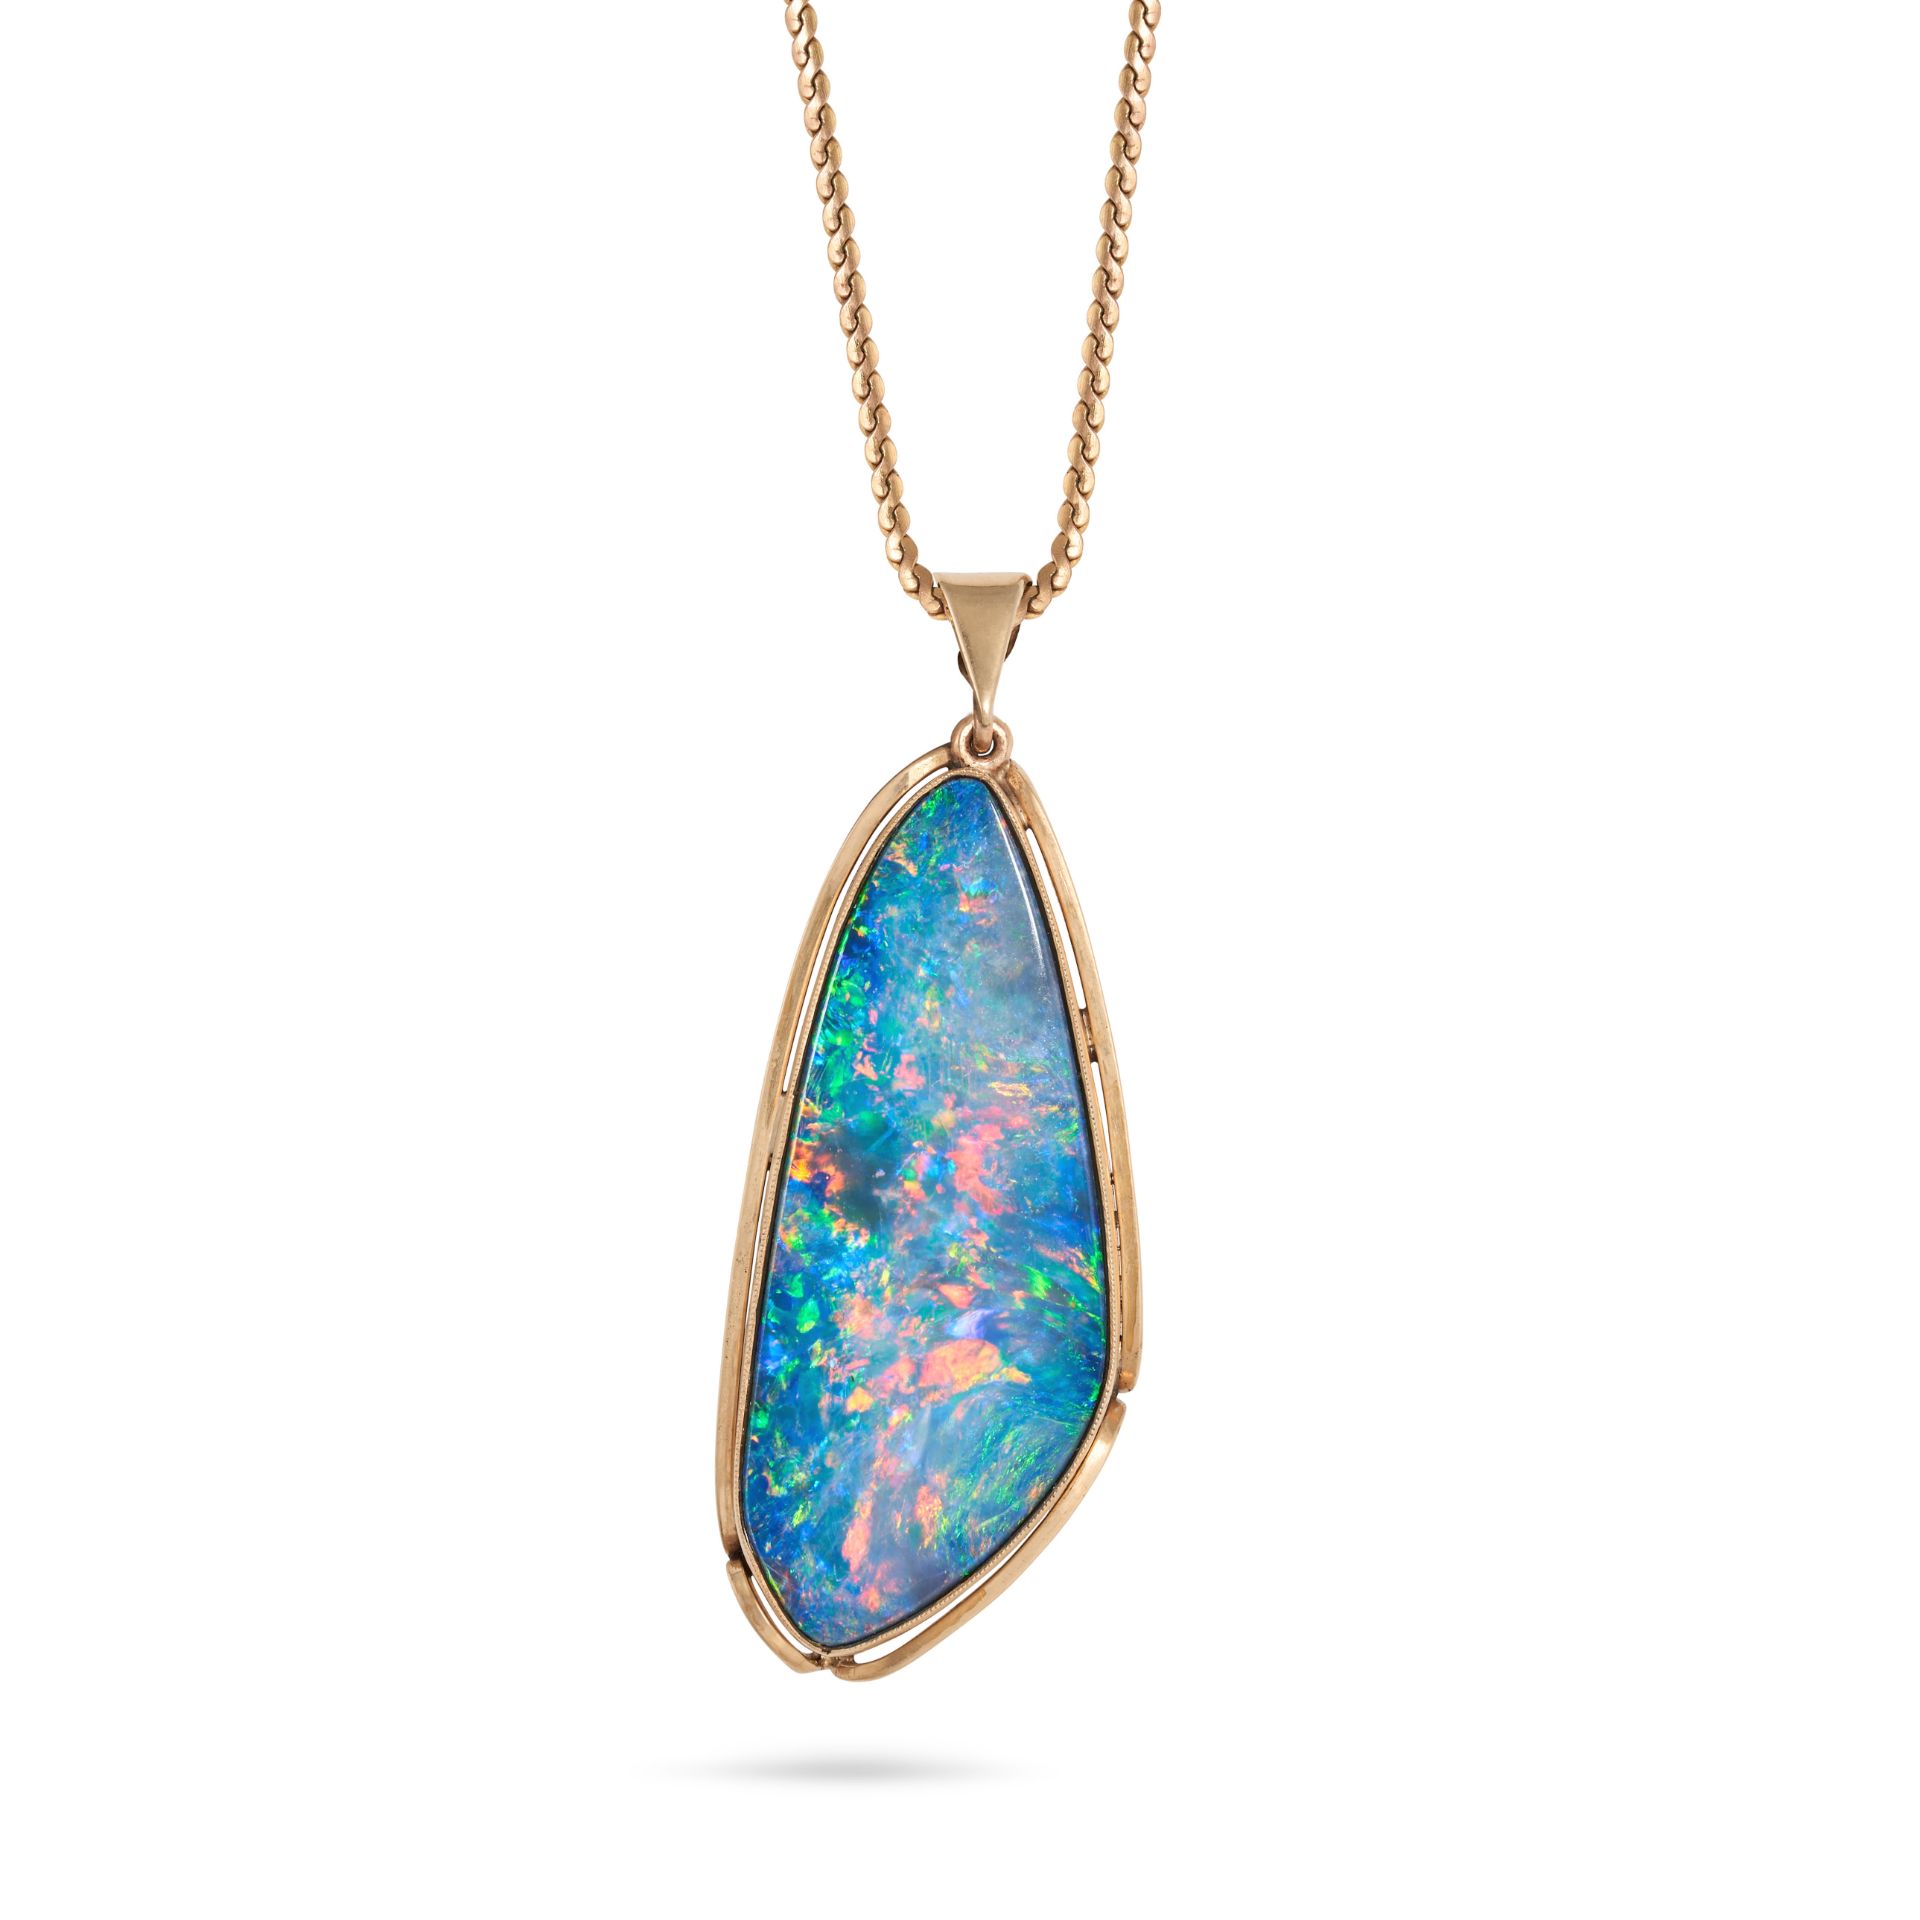 AN OPAL PENDANT NECKLACE in yellow gold, the pendant set with a cabochon opal, suspended from a f...